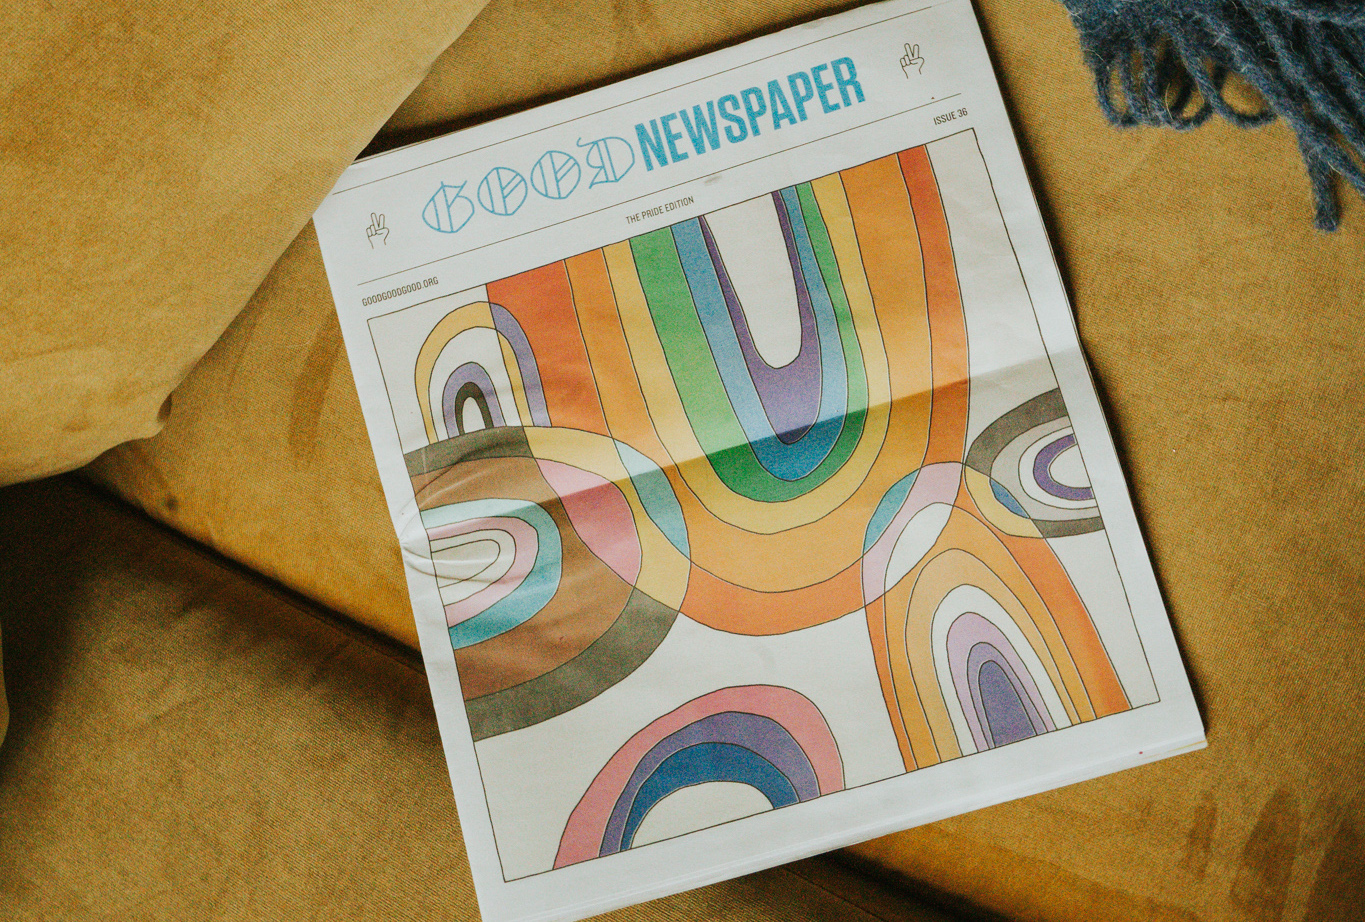 How to start a newspaper: A beginner’s guide from Branden Harvey of The Goodnewspaper